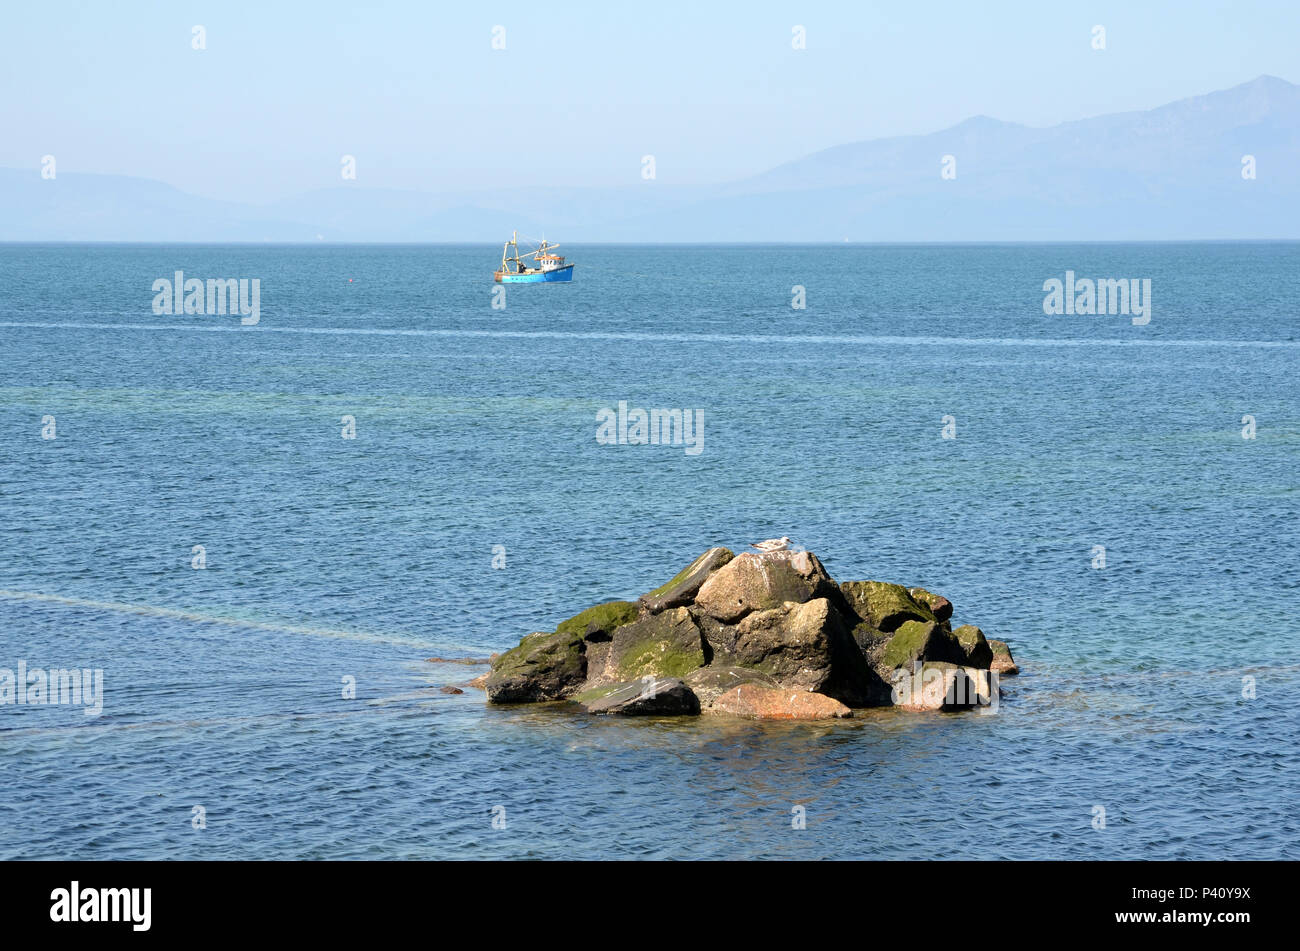 Fishing boat out at sea off the coast of Saltcoats Stock Photo